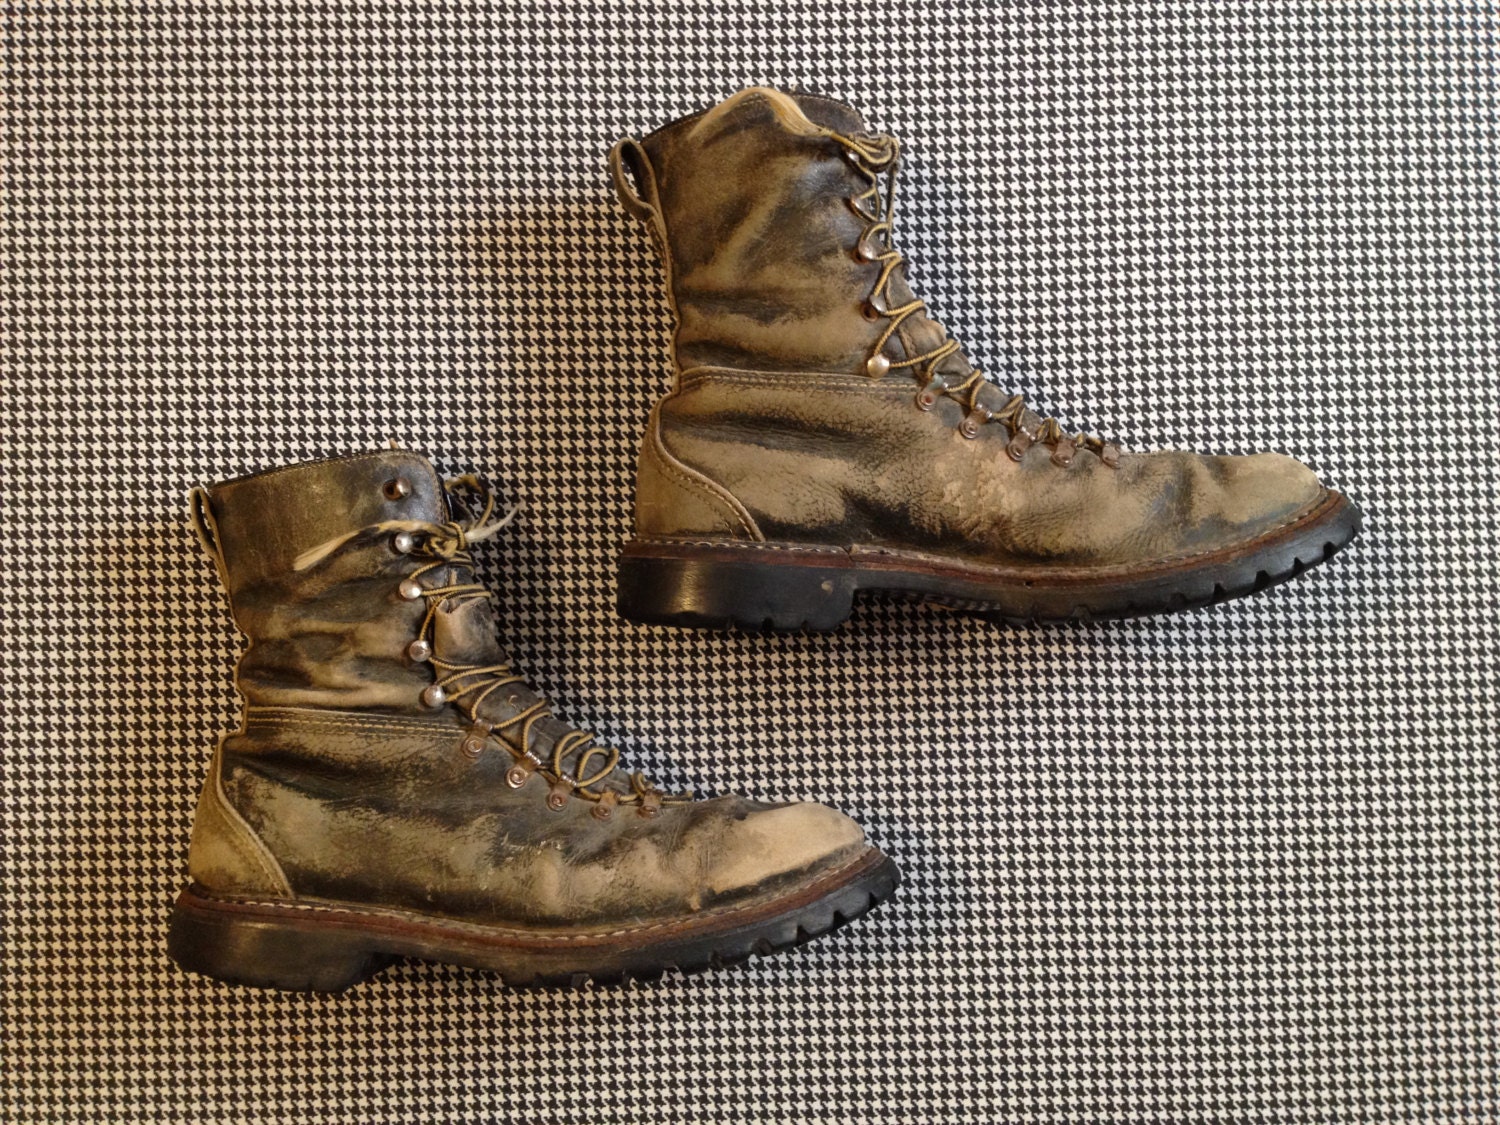 1950's Herman Survivor boots by Herman Shoes & Boots